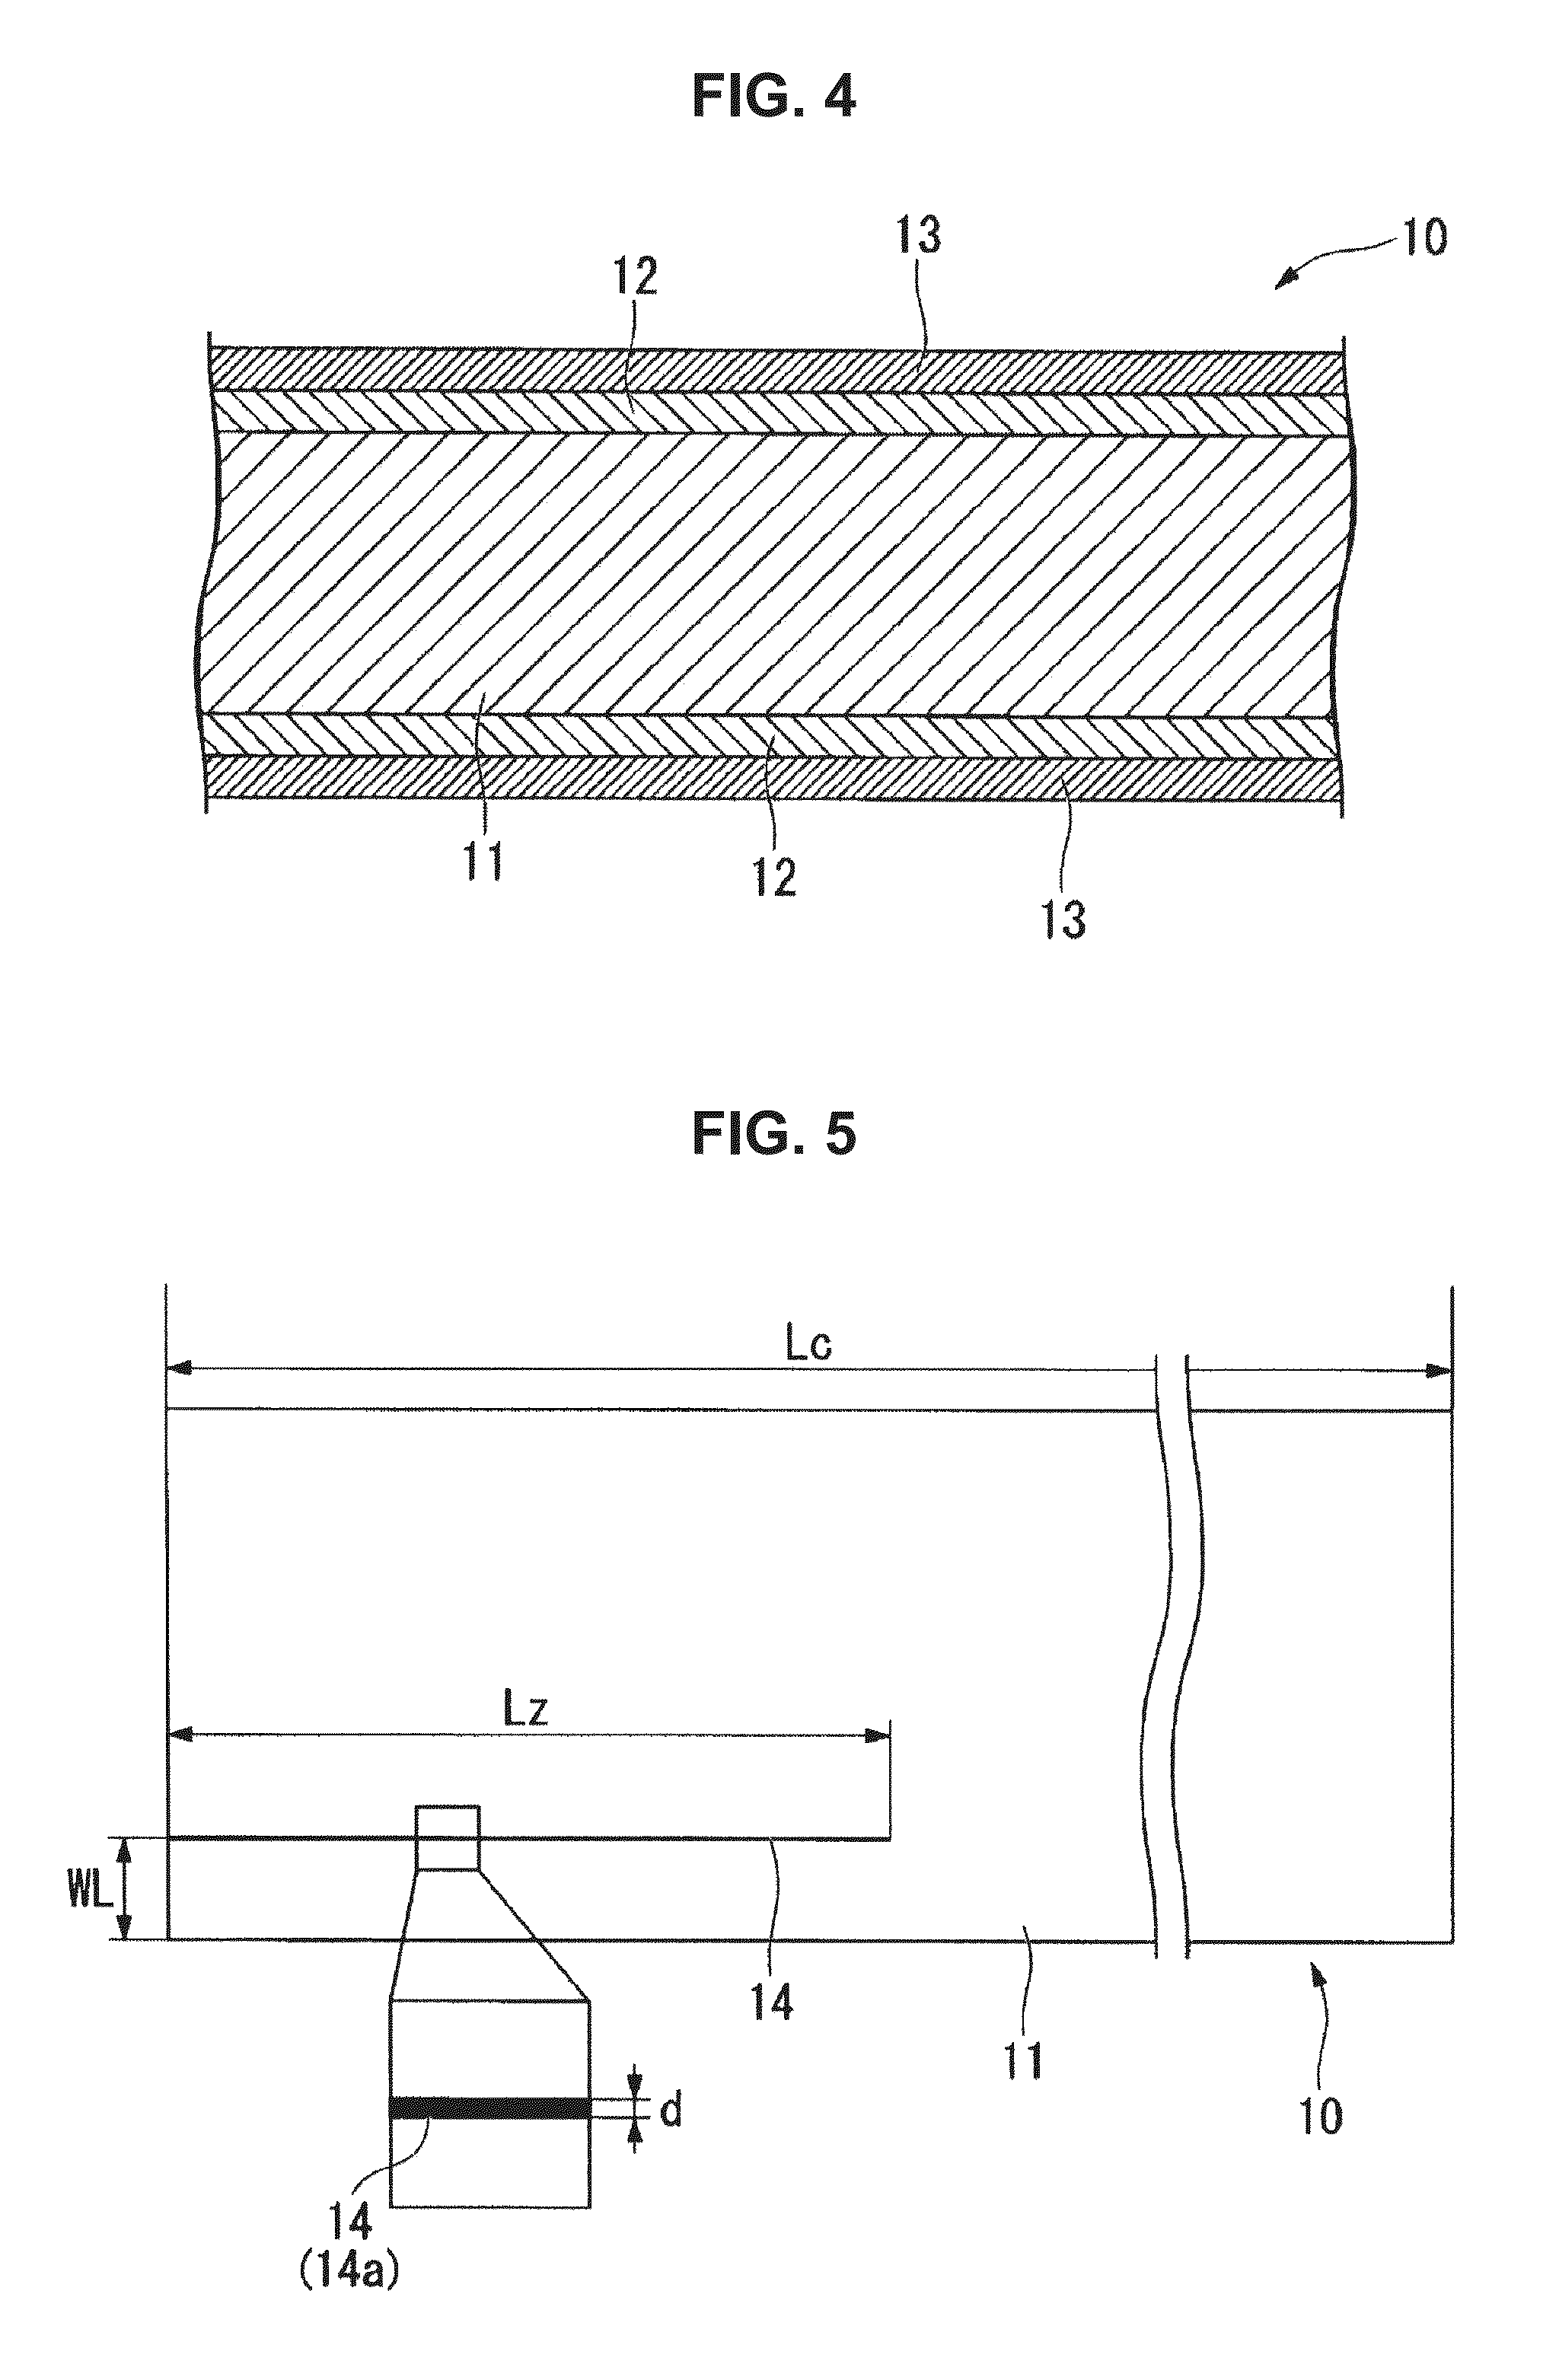 Grain oriented electrical steel sheet and method of producing grain oriented electrical steel sheet